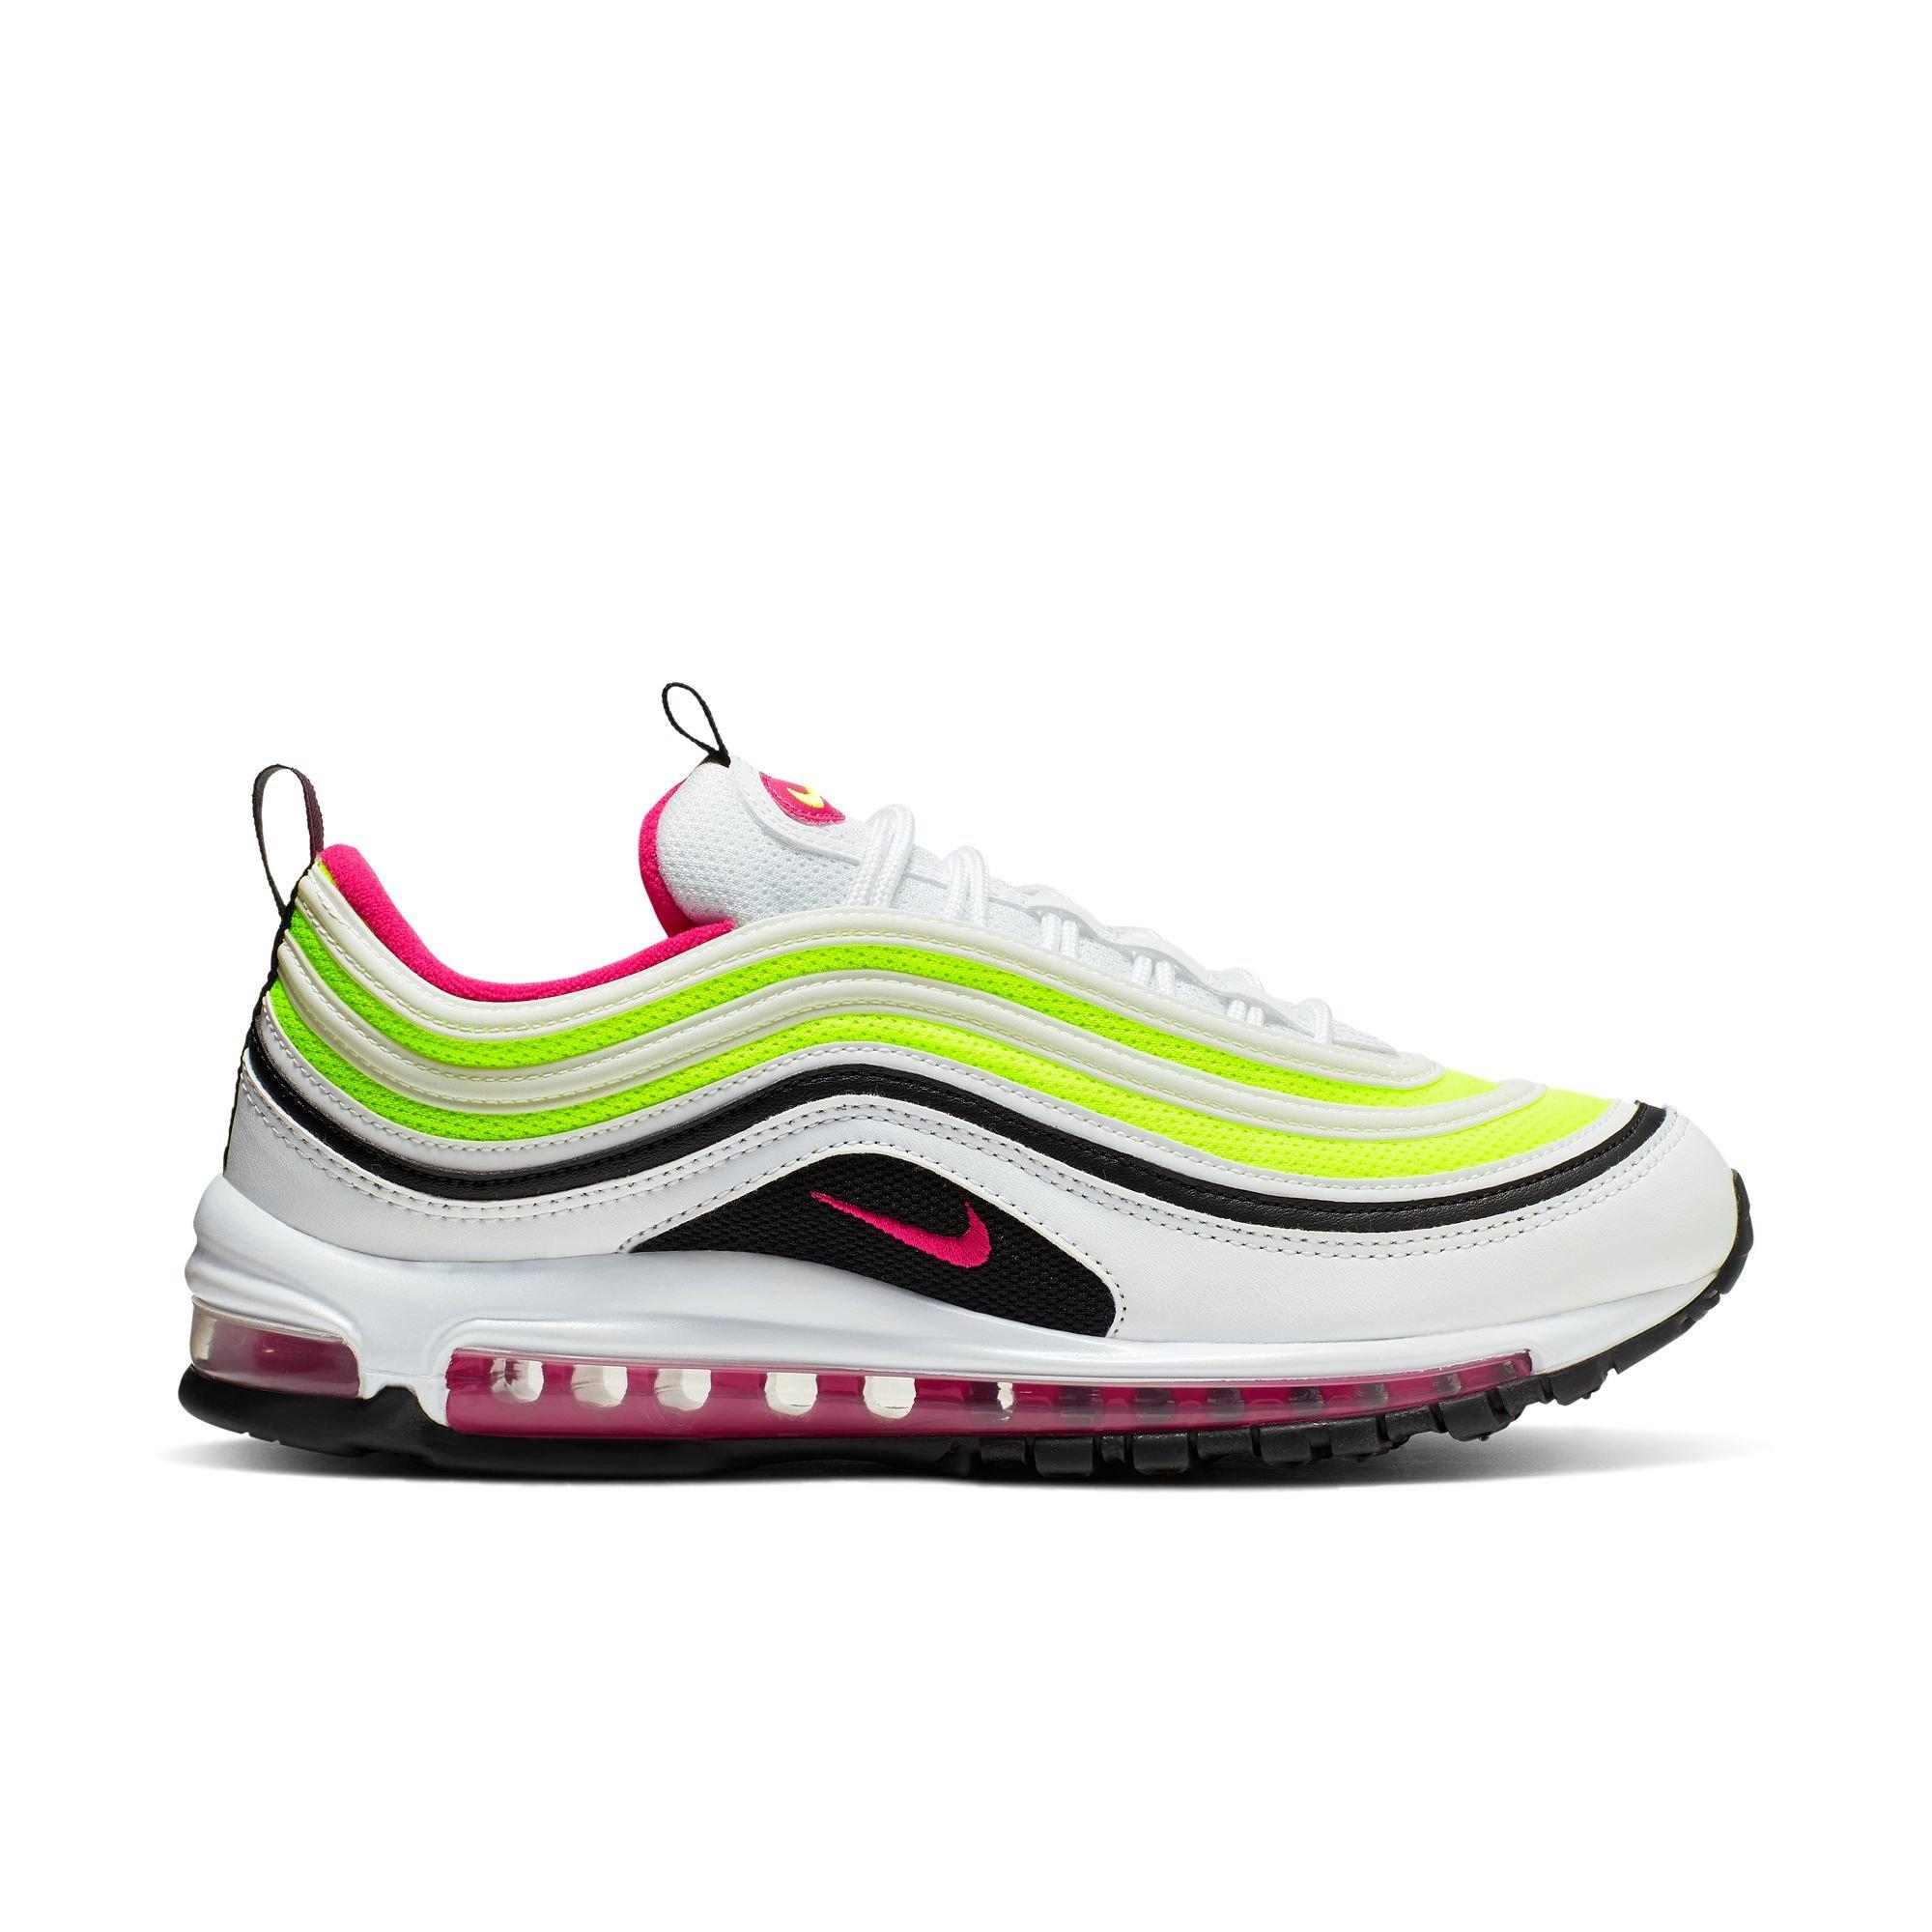 pink and lime green nike shoes